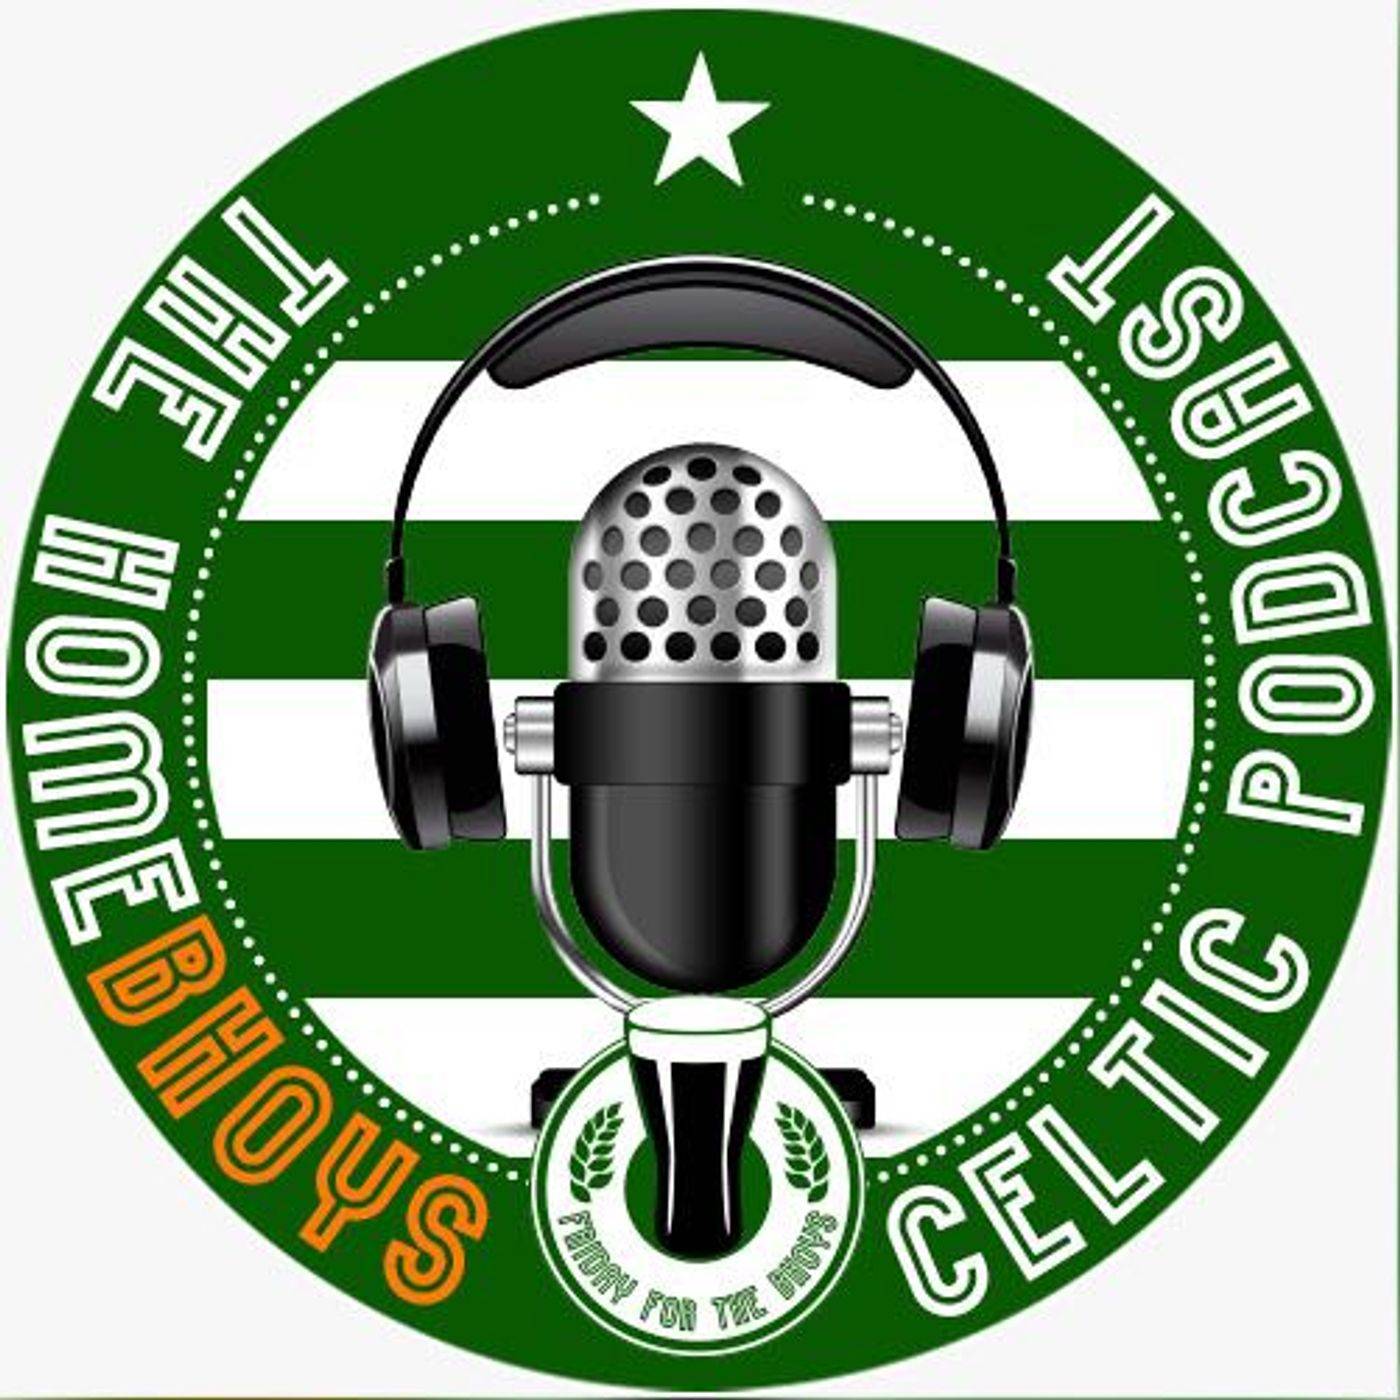 HomeBhoys #374 – Scales of Justice!